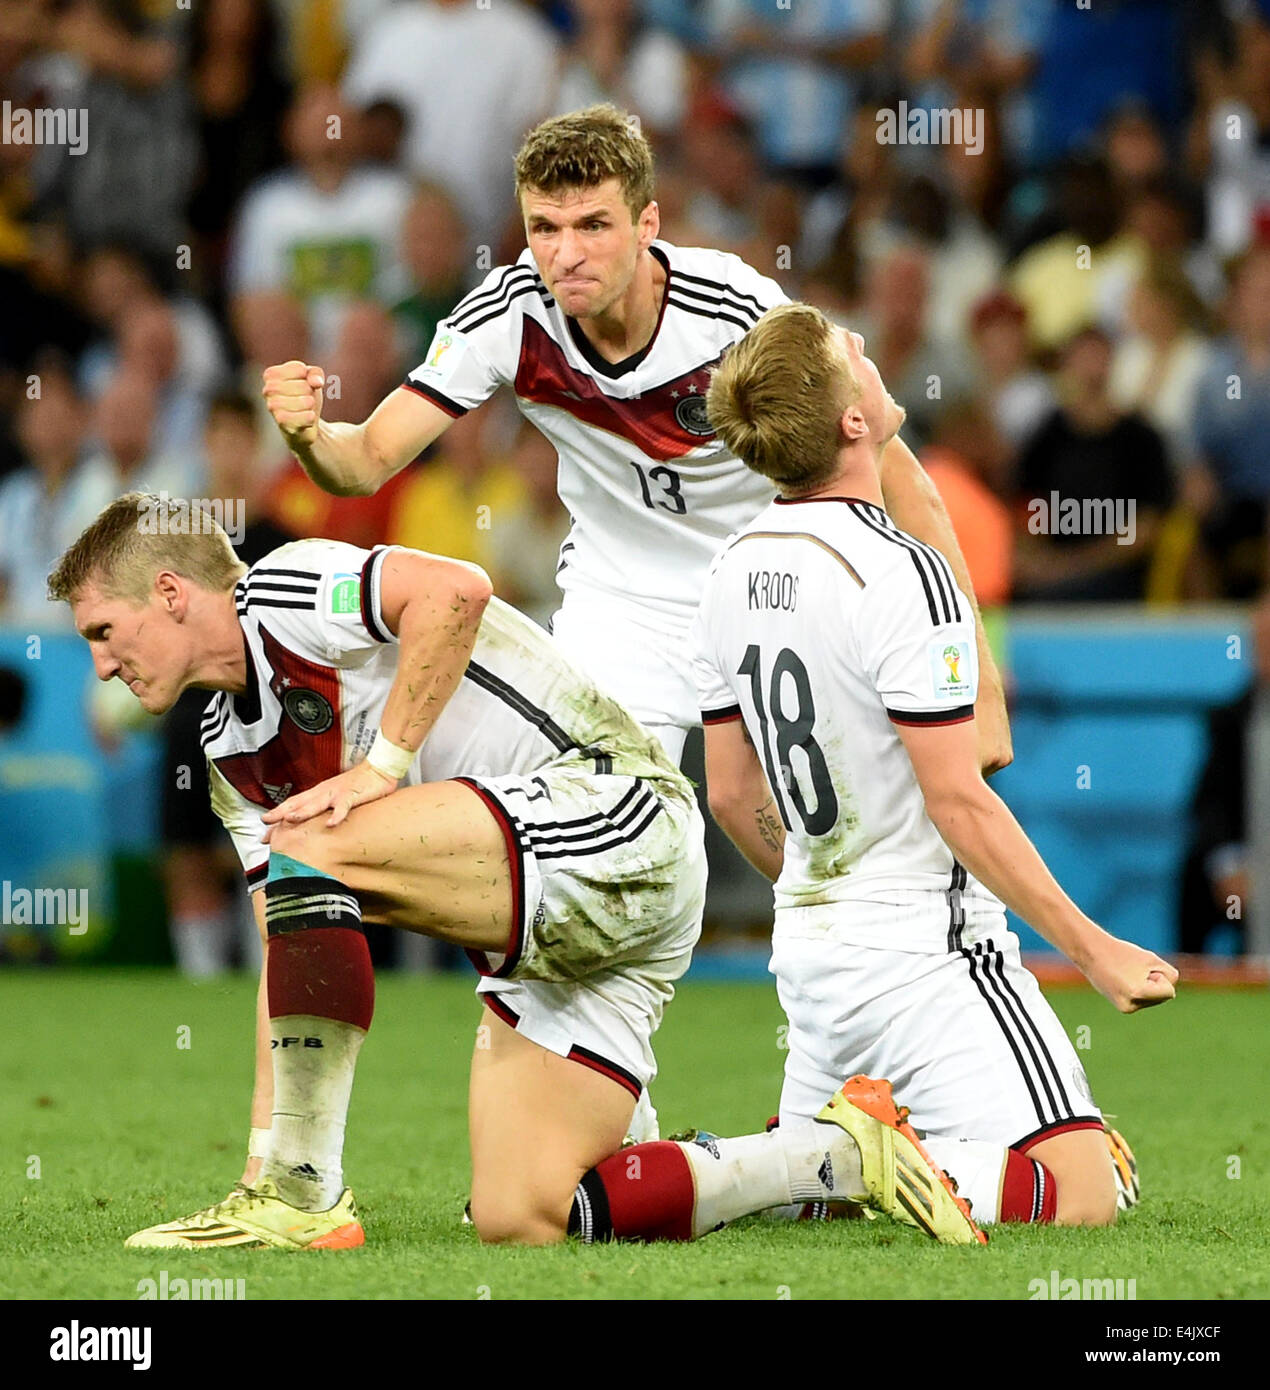 Rio De Janeiro, Brazil. 13th July, 2014. Germany's Toni Kroos, Thomas Muller and Bastian Schweinsteiger (R to L) celebrate their victory after the final match between Germany and Argentina of 2014 FIFA World Cup at the Estadio do Maracana Stadium in Rio de Janeiro, Brazil, on July 13, 2014. Germany won 1-0 over Argentina after 120 minutes and took its fourth World Cup title on Sunday. Credit:  Liu Dawei/Xinhua/Alamy Live News Stock Photo